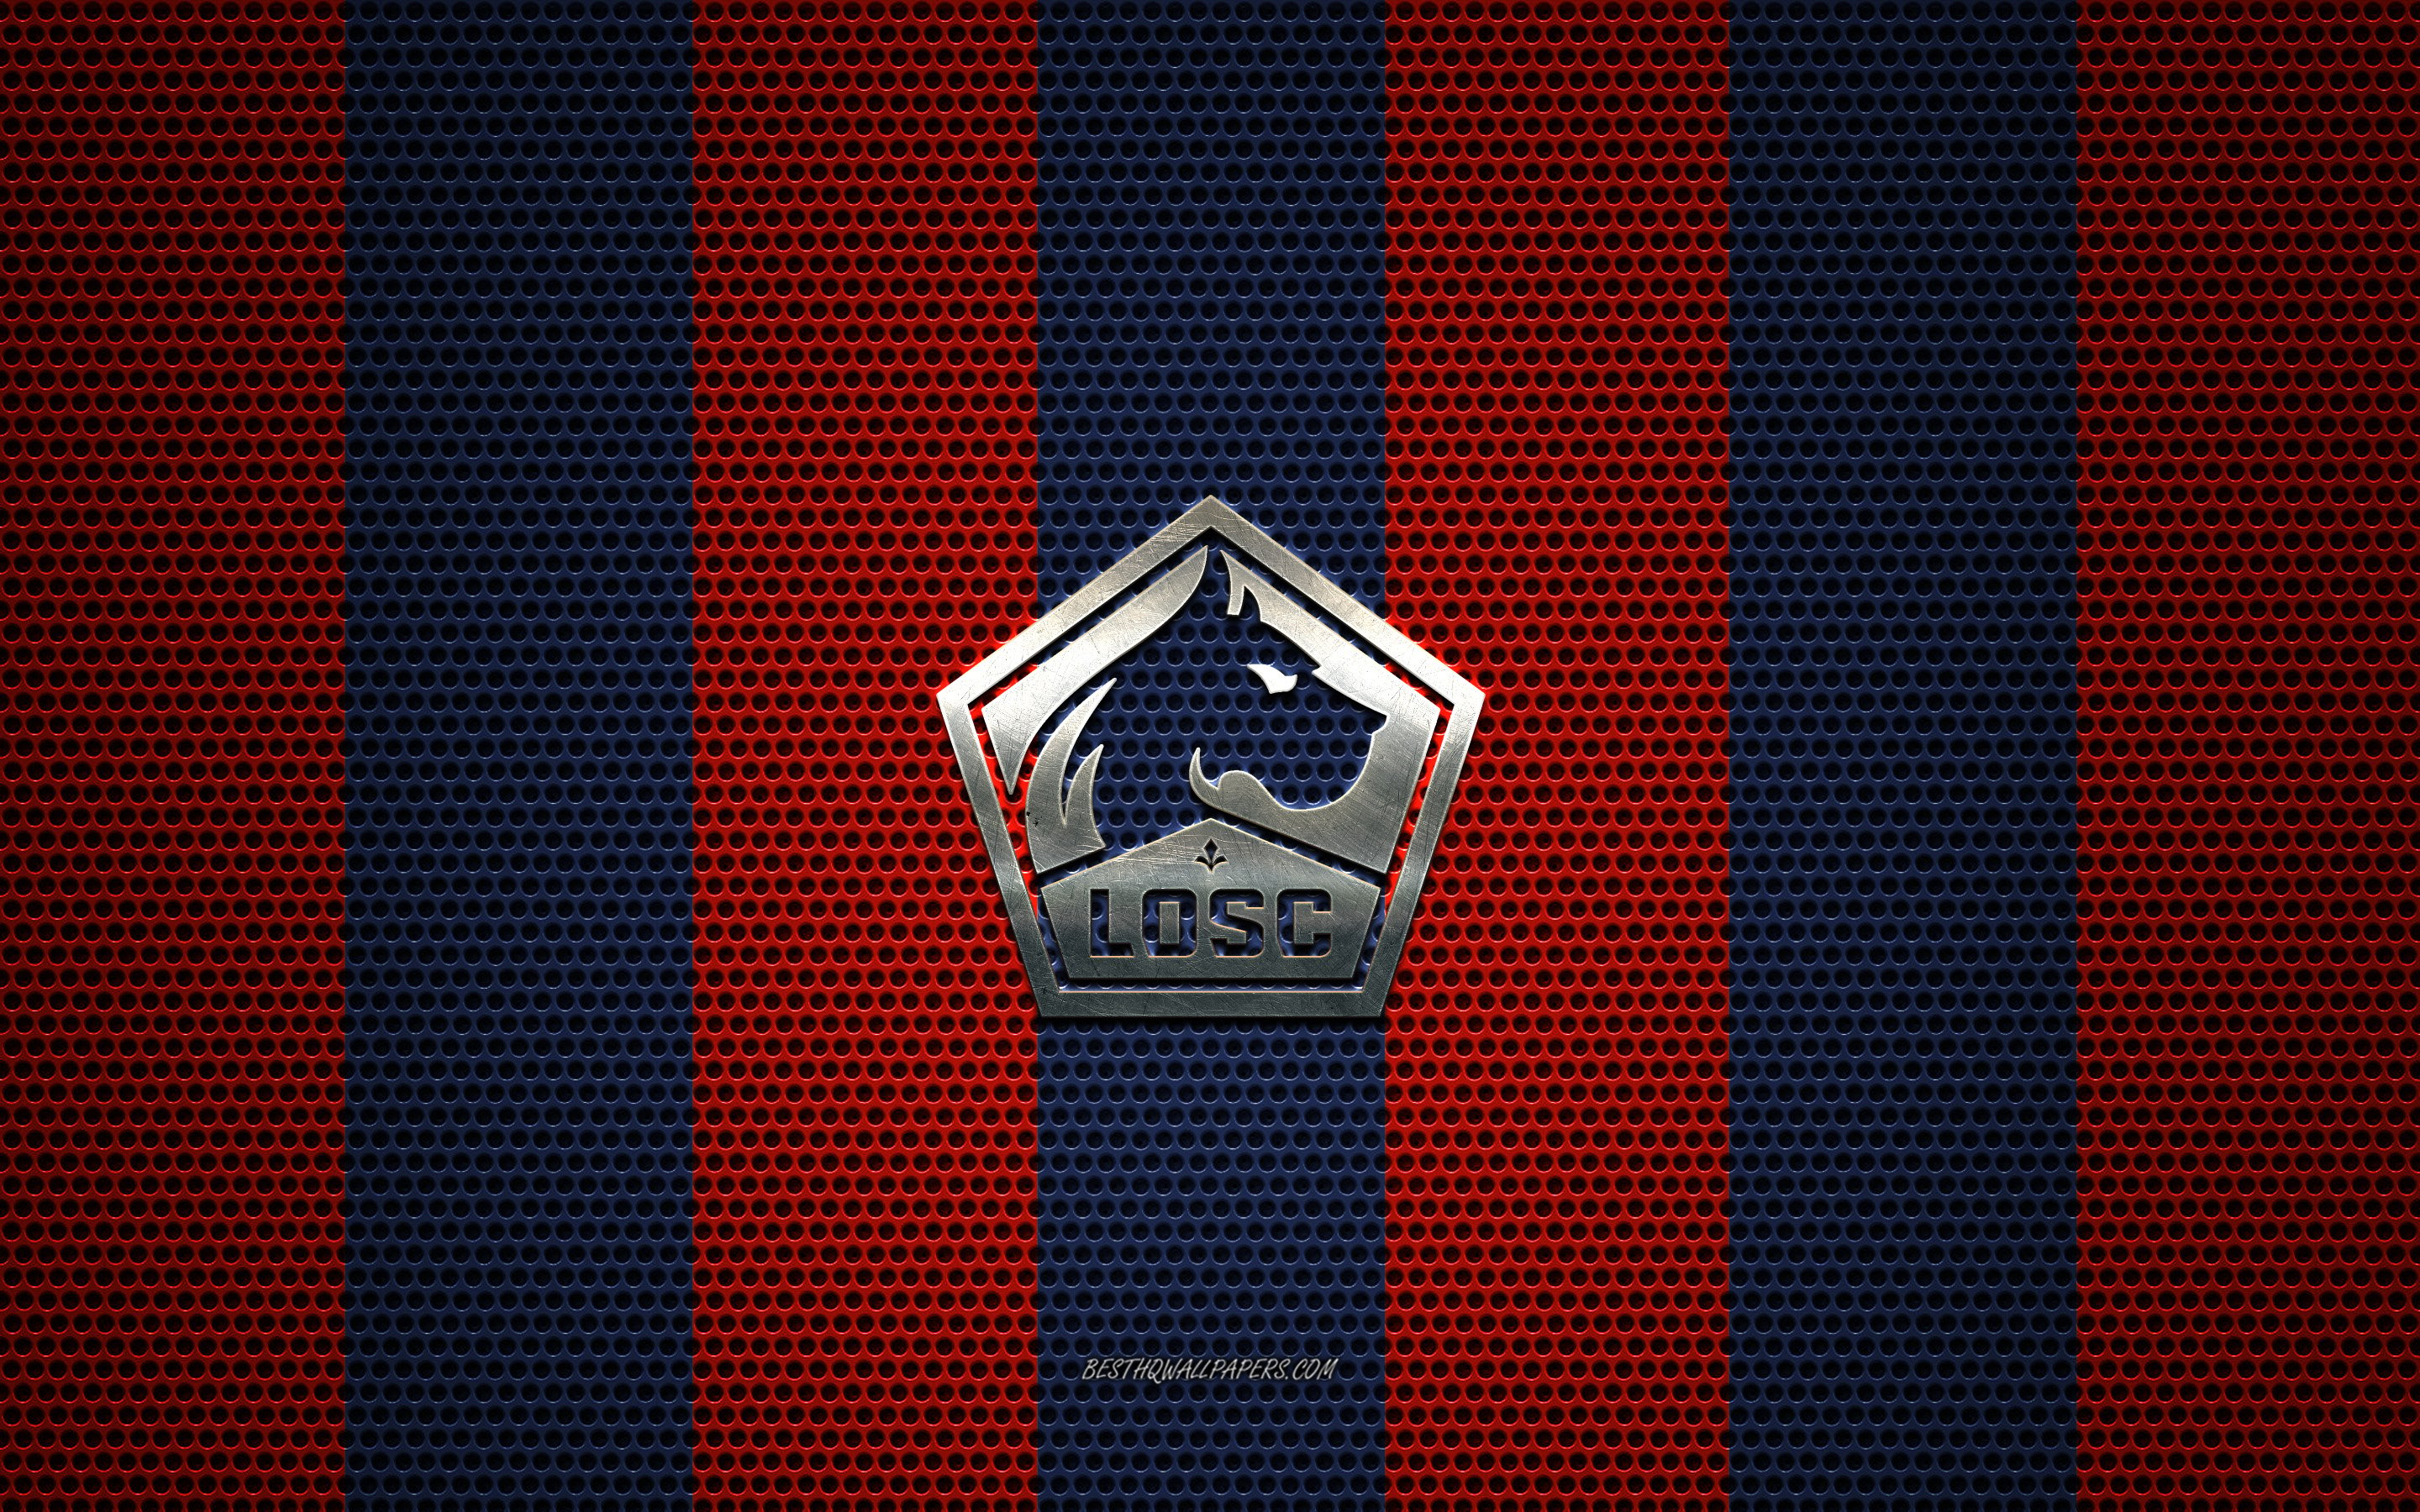 Download Wallpaper LOSC Lille Logo, French Football Club, Metal Emblem, Red Blue White Metal Mesh Background, LOSC Lille, Ligue Lille, France, Football For Desktop With Resolution 2880x1800. High Quality HD Picture Wallpaper